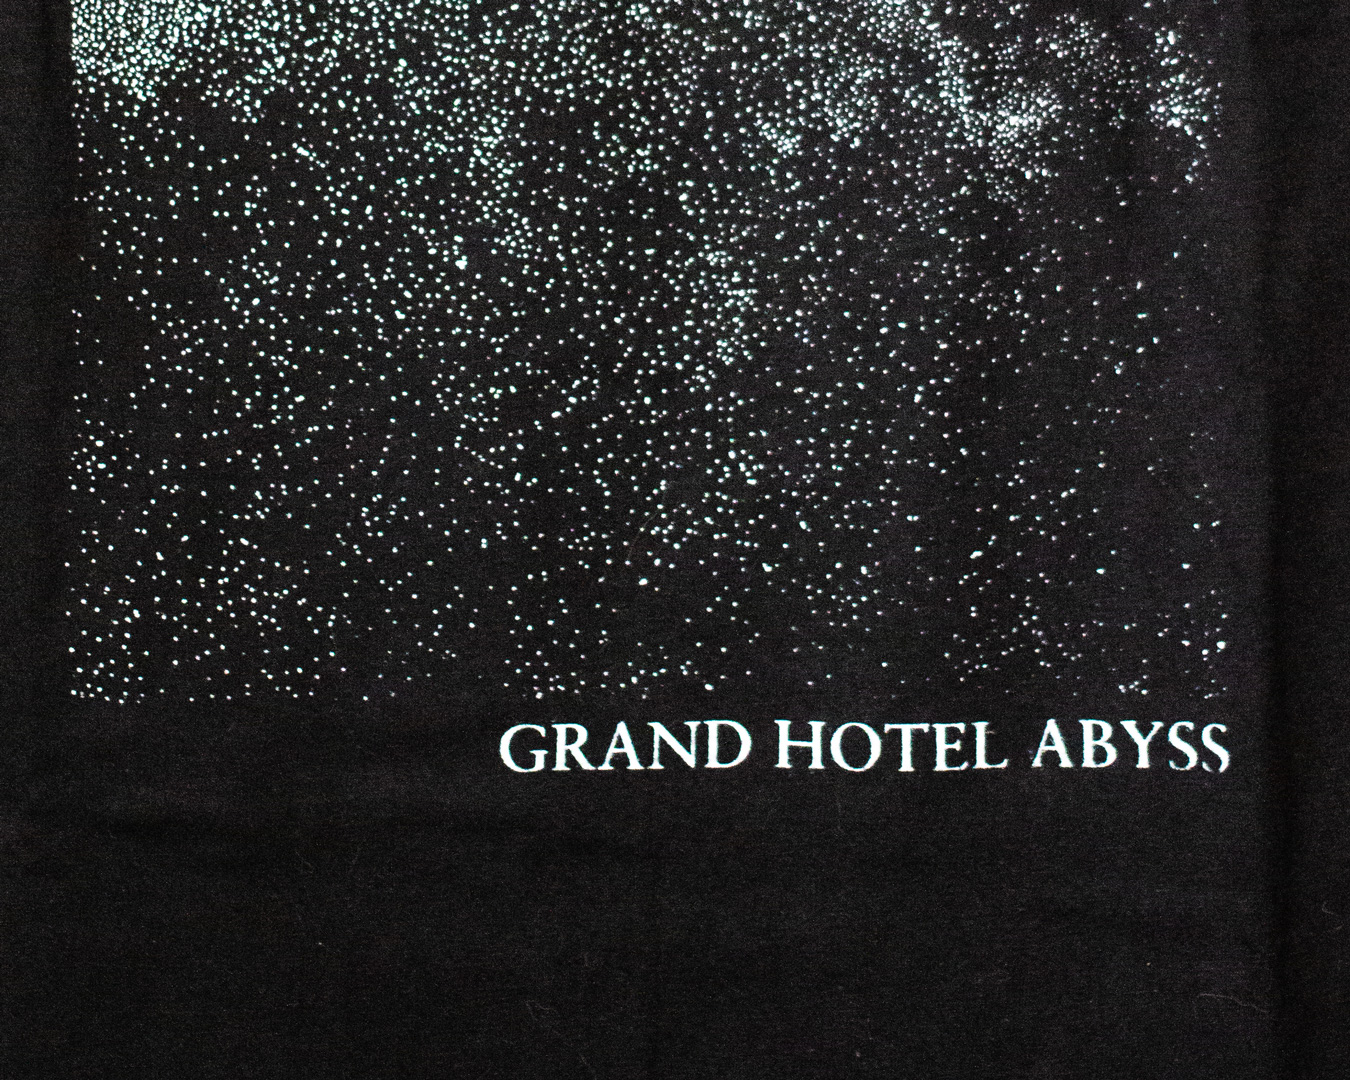 The lower half of one of the bandshirts from contact high. It reads "Grand Budapest Hotel".